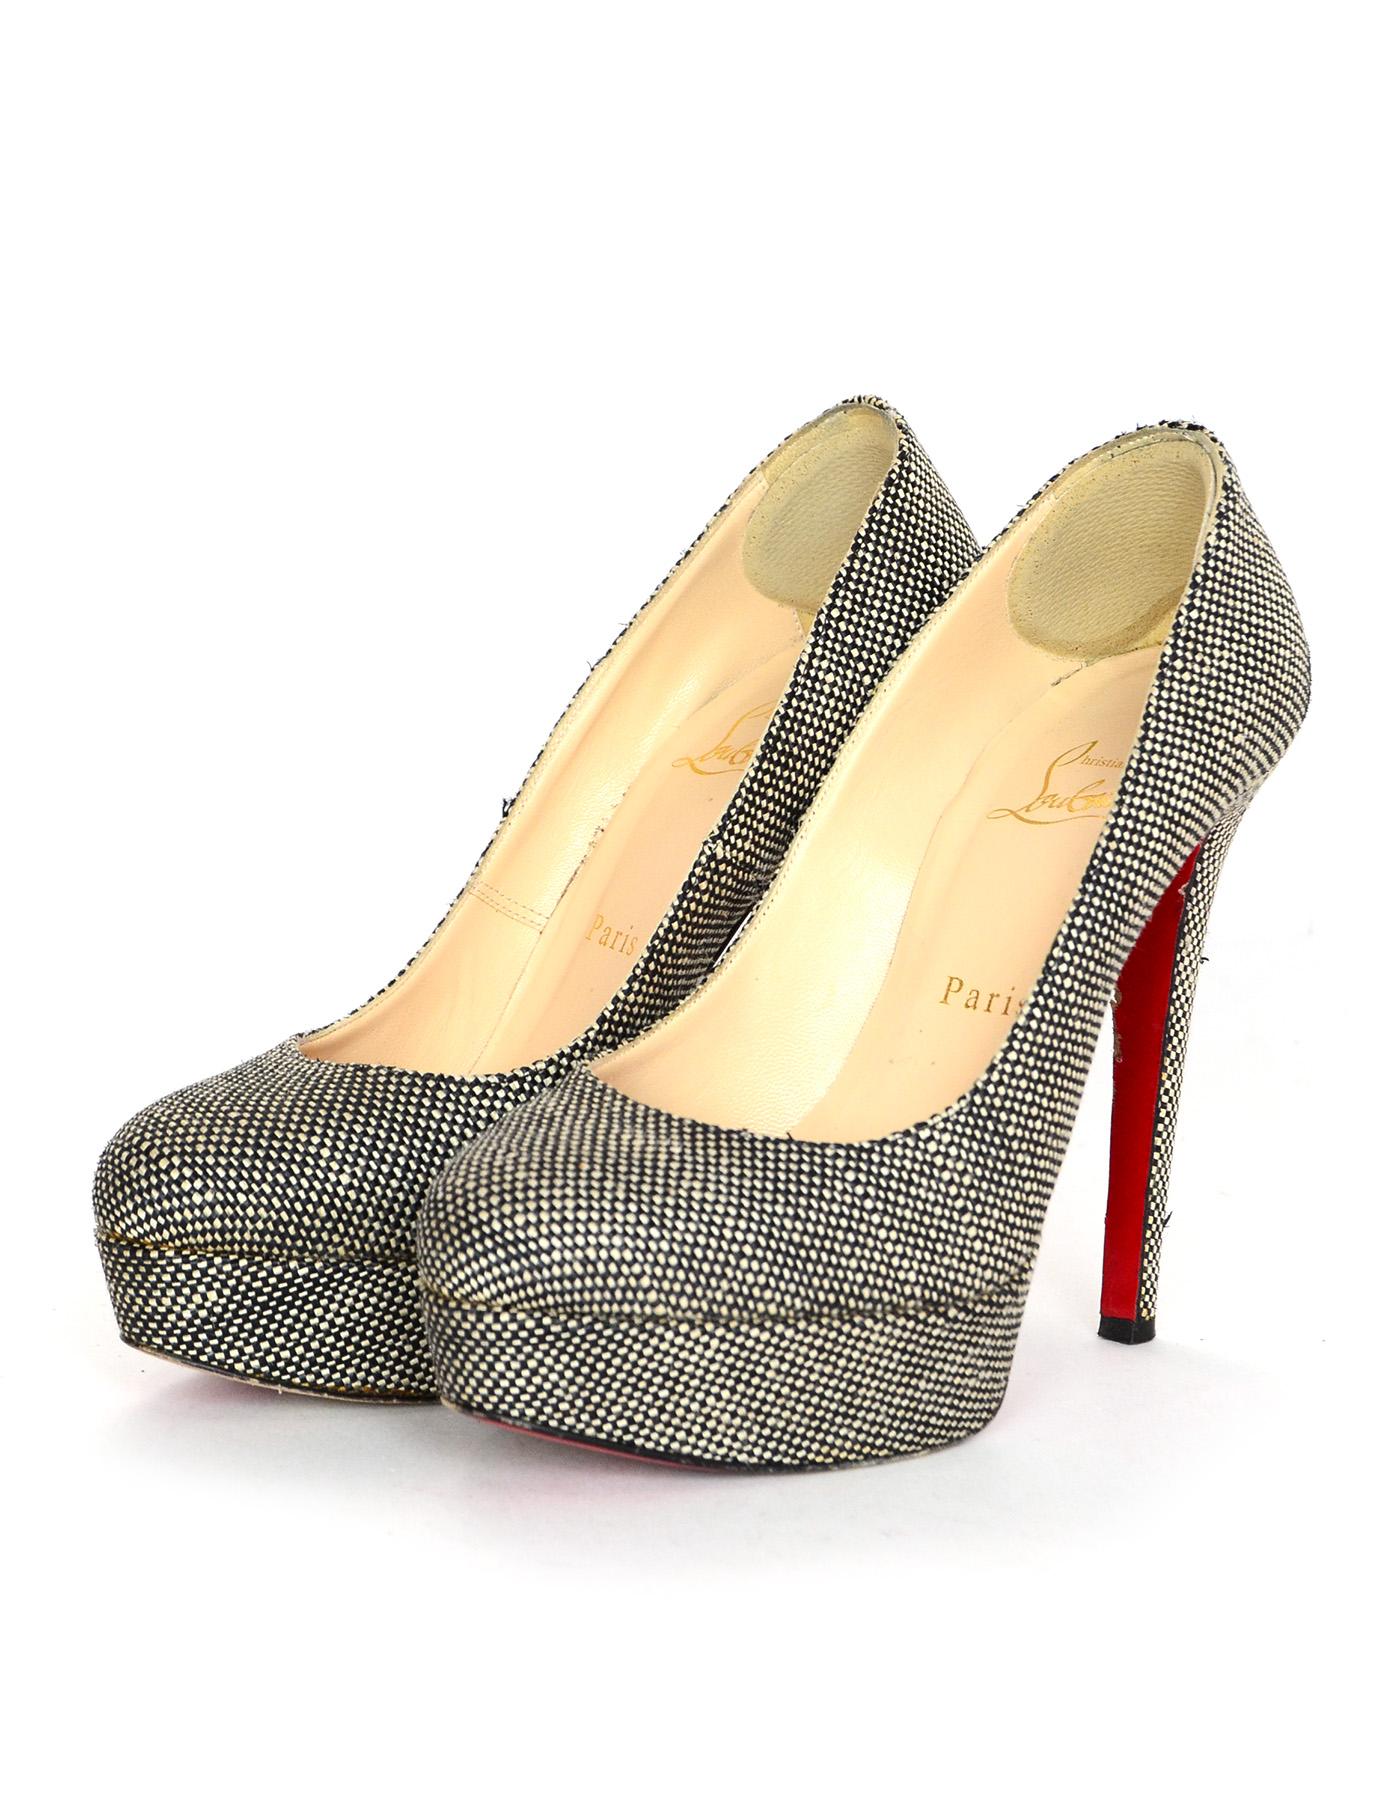 Christian Louboutin Black/White Tweed Bianca Platform Shoes Sz 37

Made In: Italy
Color: Black/white
Materials: Tweed
Closure/Opening: Slide on 
Overall Condition: Excellent pre-owned condition with exception of minor wear on back of heels and